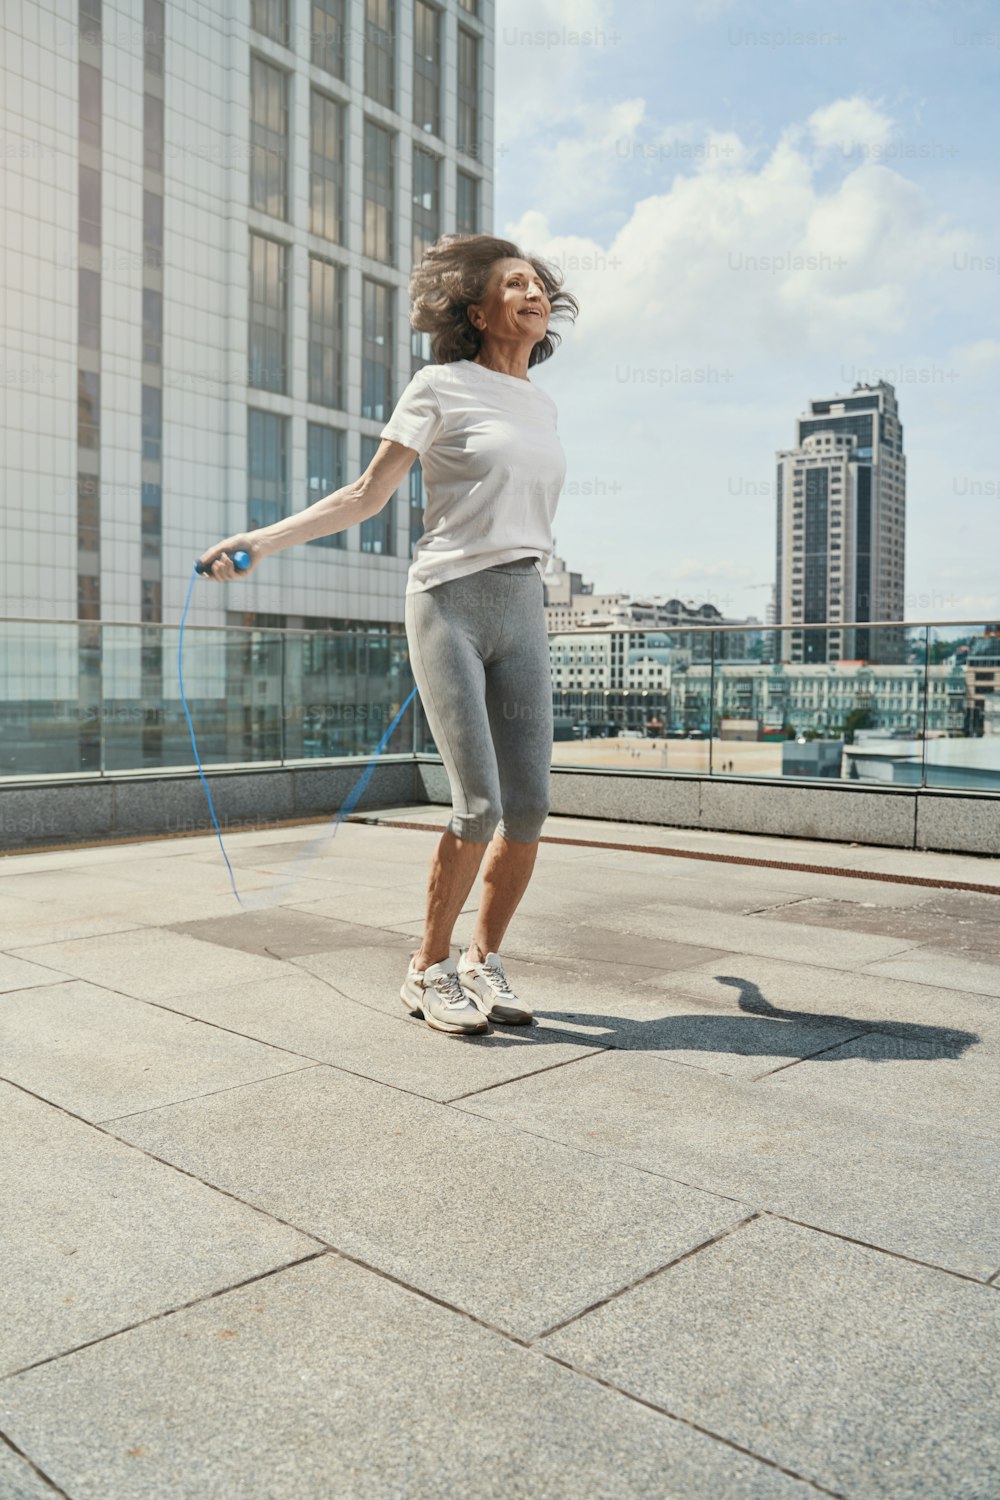 Jolly sporty lady is spending active time with skipping rope on open terrace above city